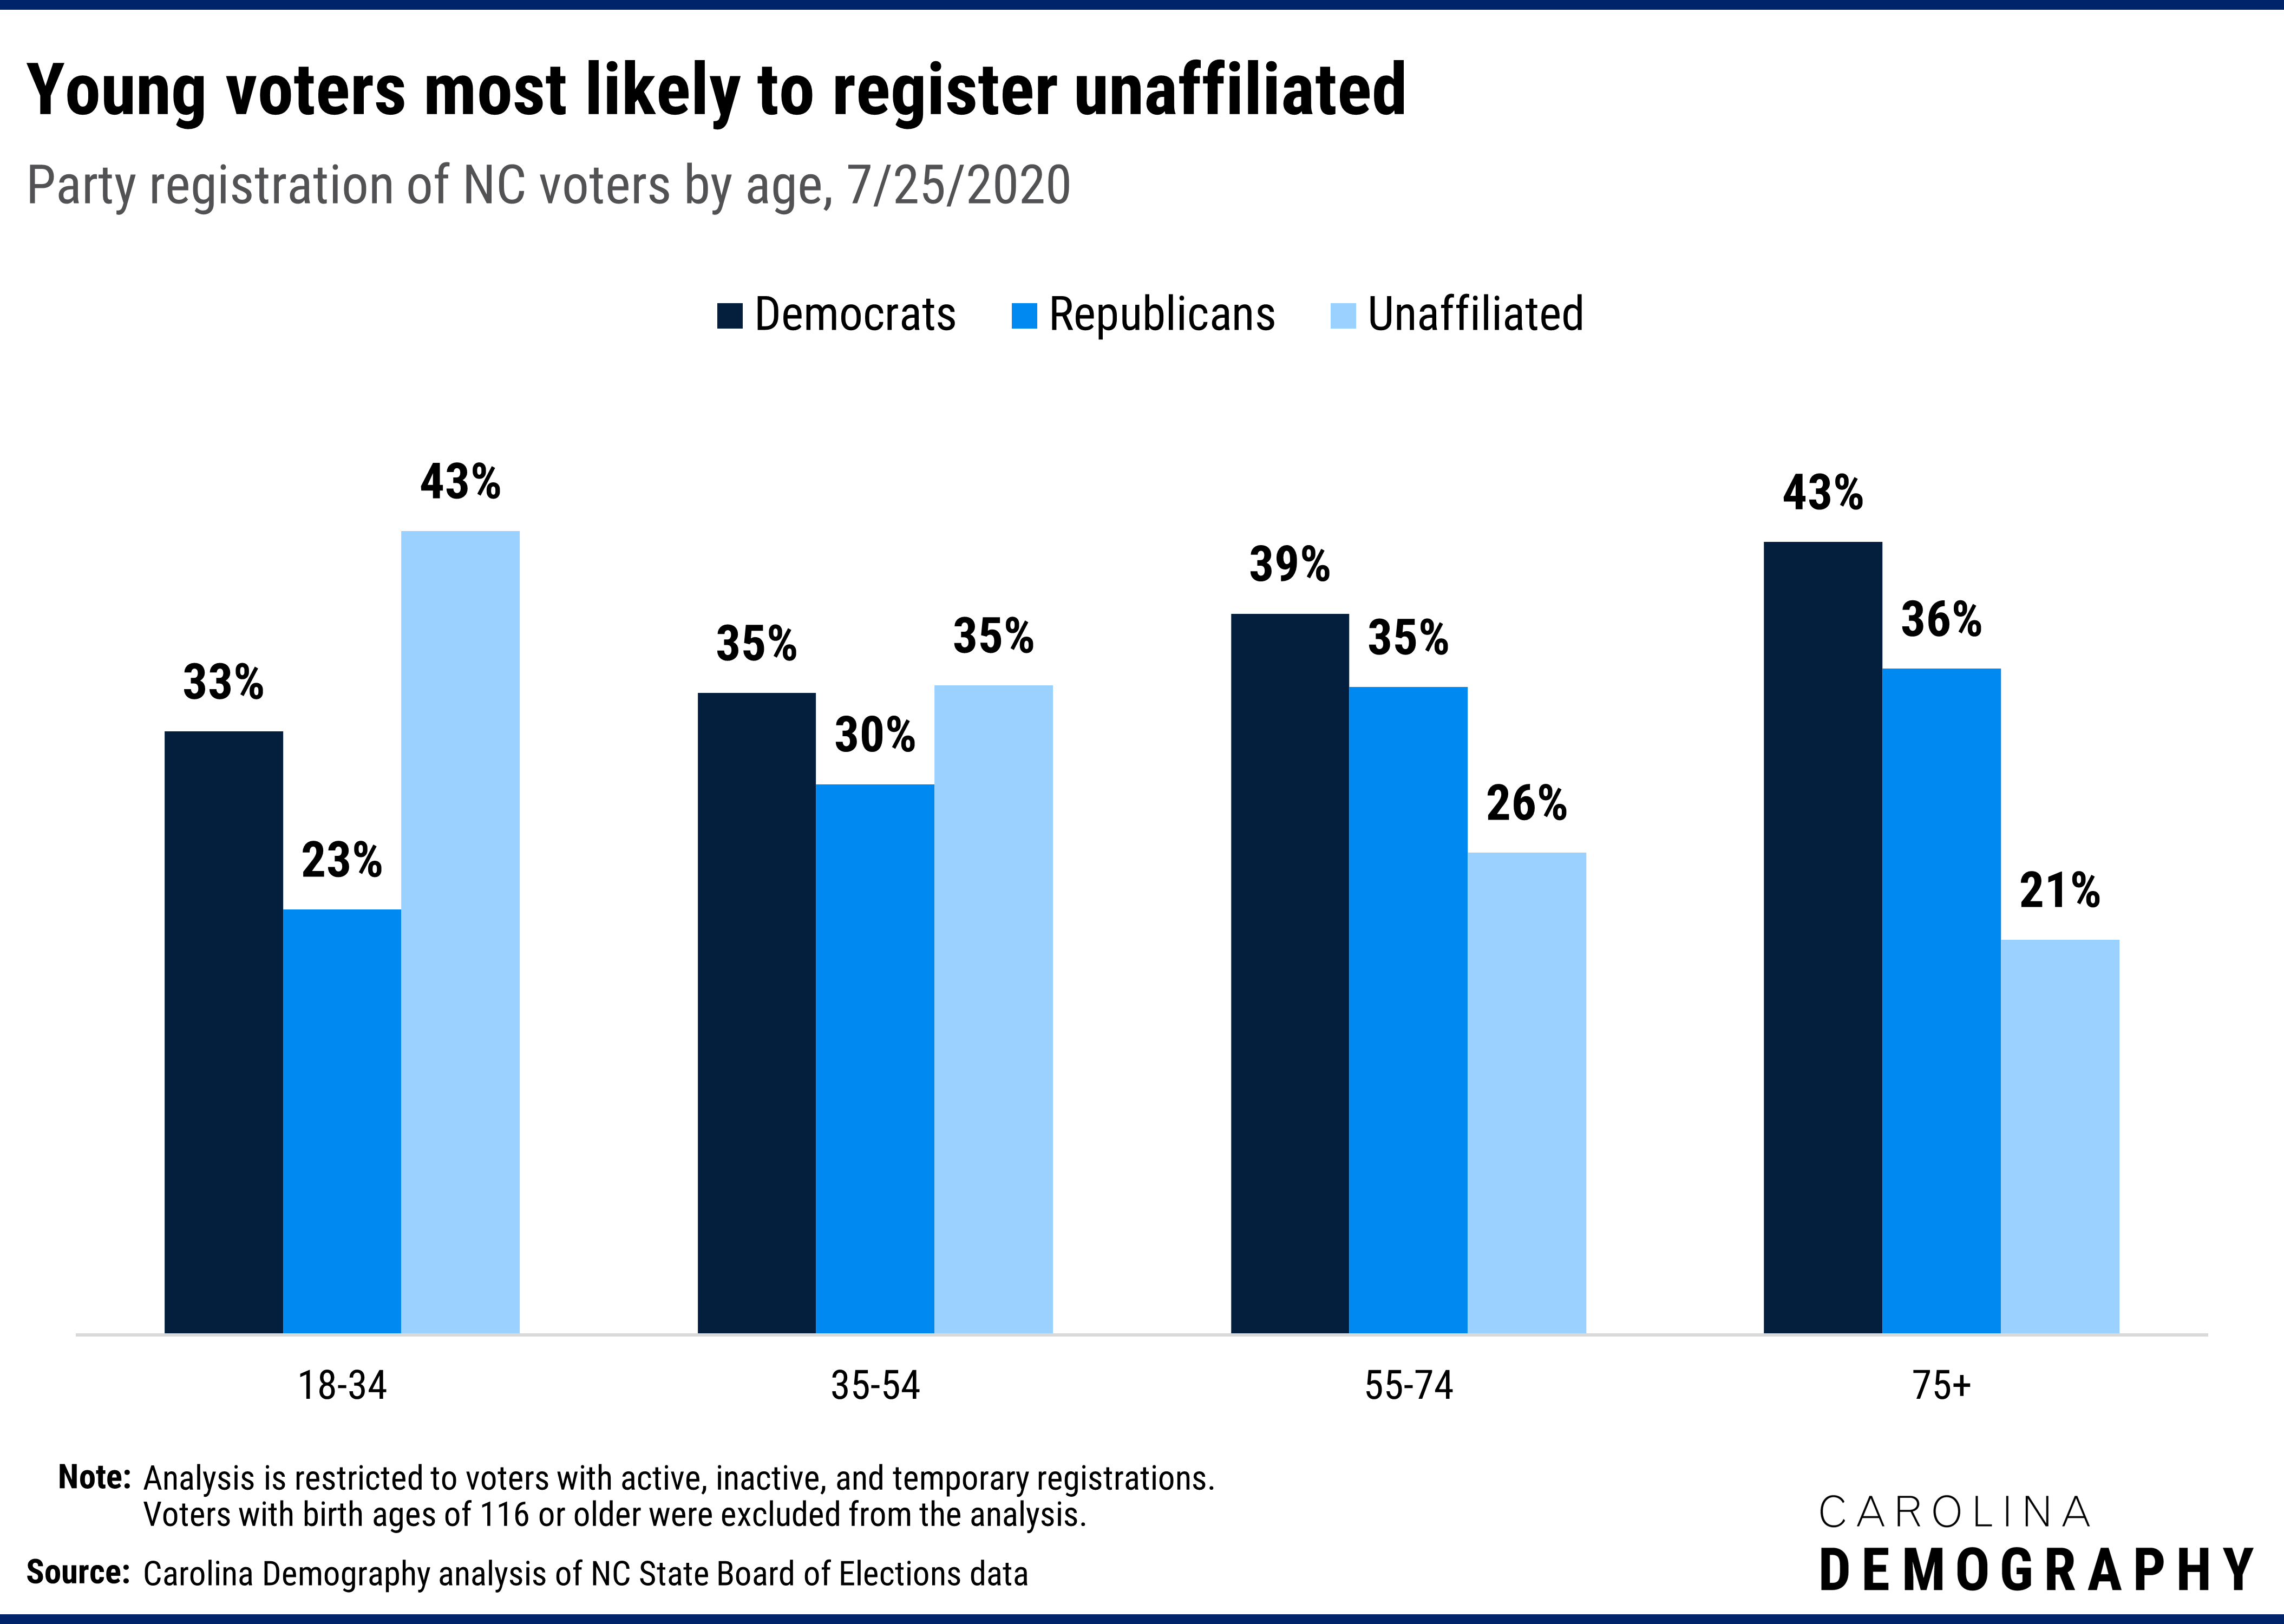 Young voters most likely to register unaffiliated Party registration of NC voters by age, 7/25/2020. Young voters are more likely to register as unaffiliated than any other age group: 43% of 18-34 year-olds are registered unaffiliated versus 35% of 35-44 year-olds, 26% of 55-74 year-olds, and 21% of voters 75 and older.